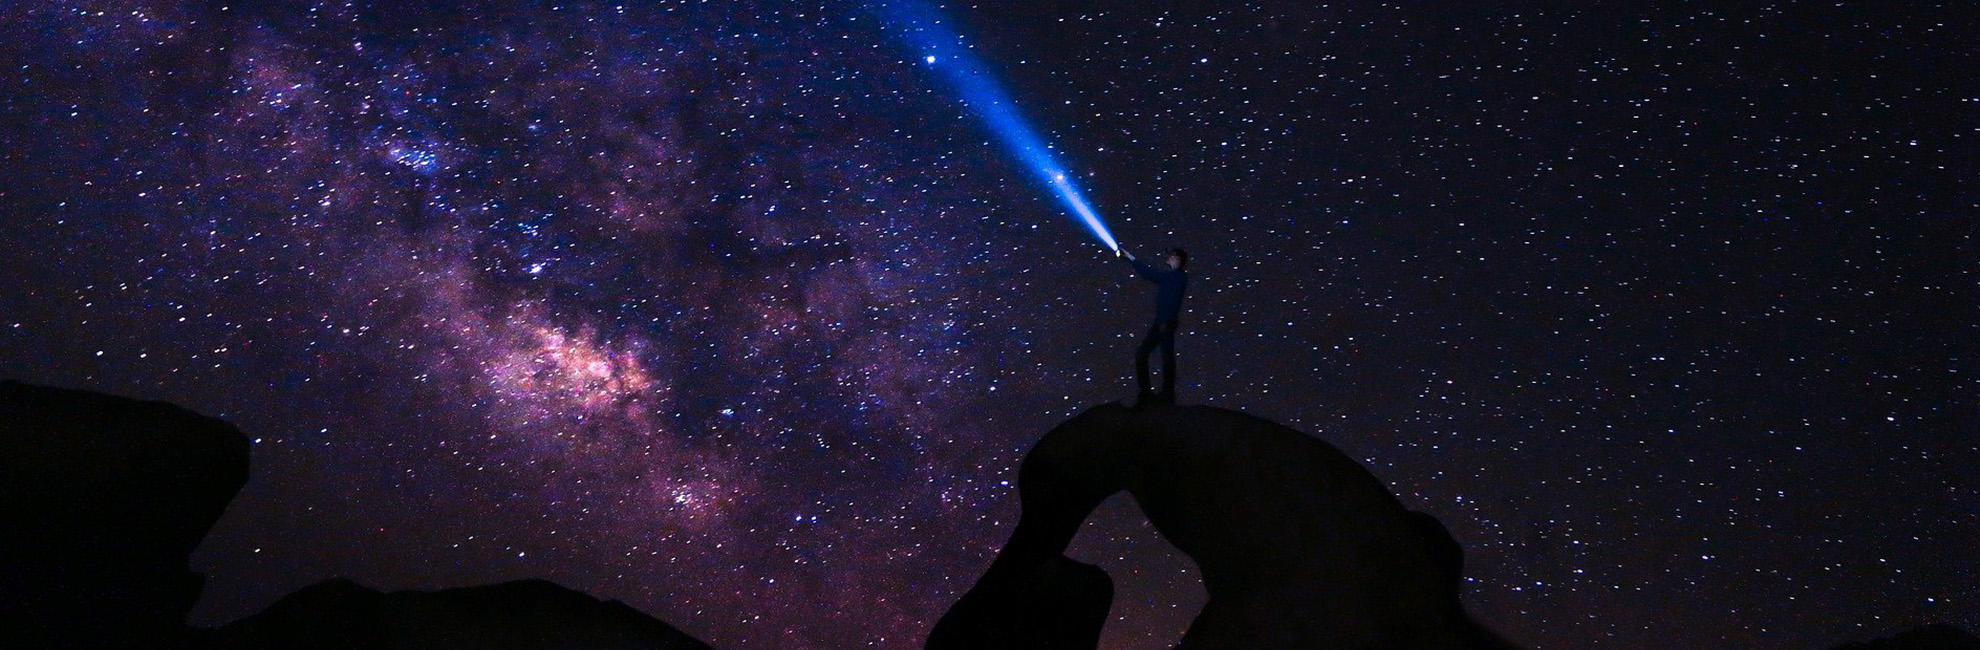 A man standing on top of a rock shining a torch into a dark, starry sky